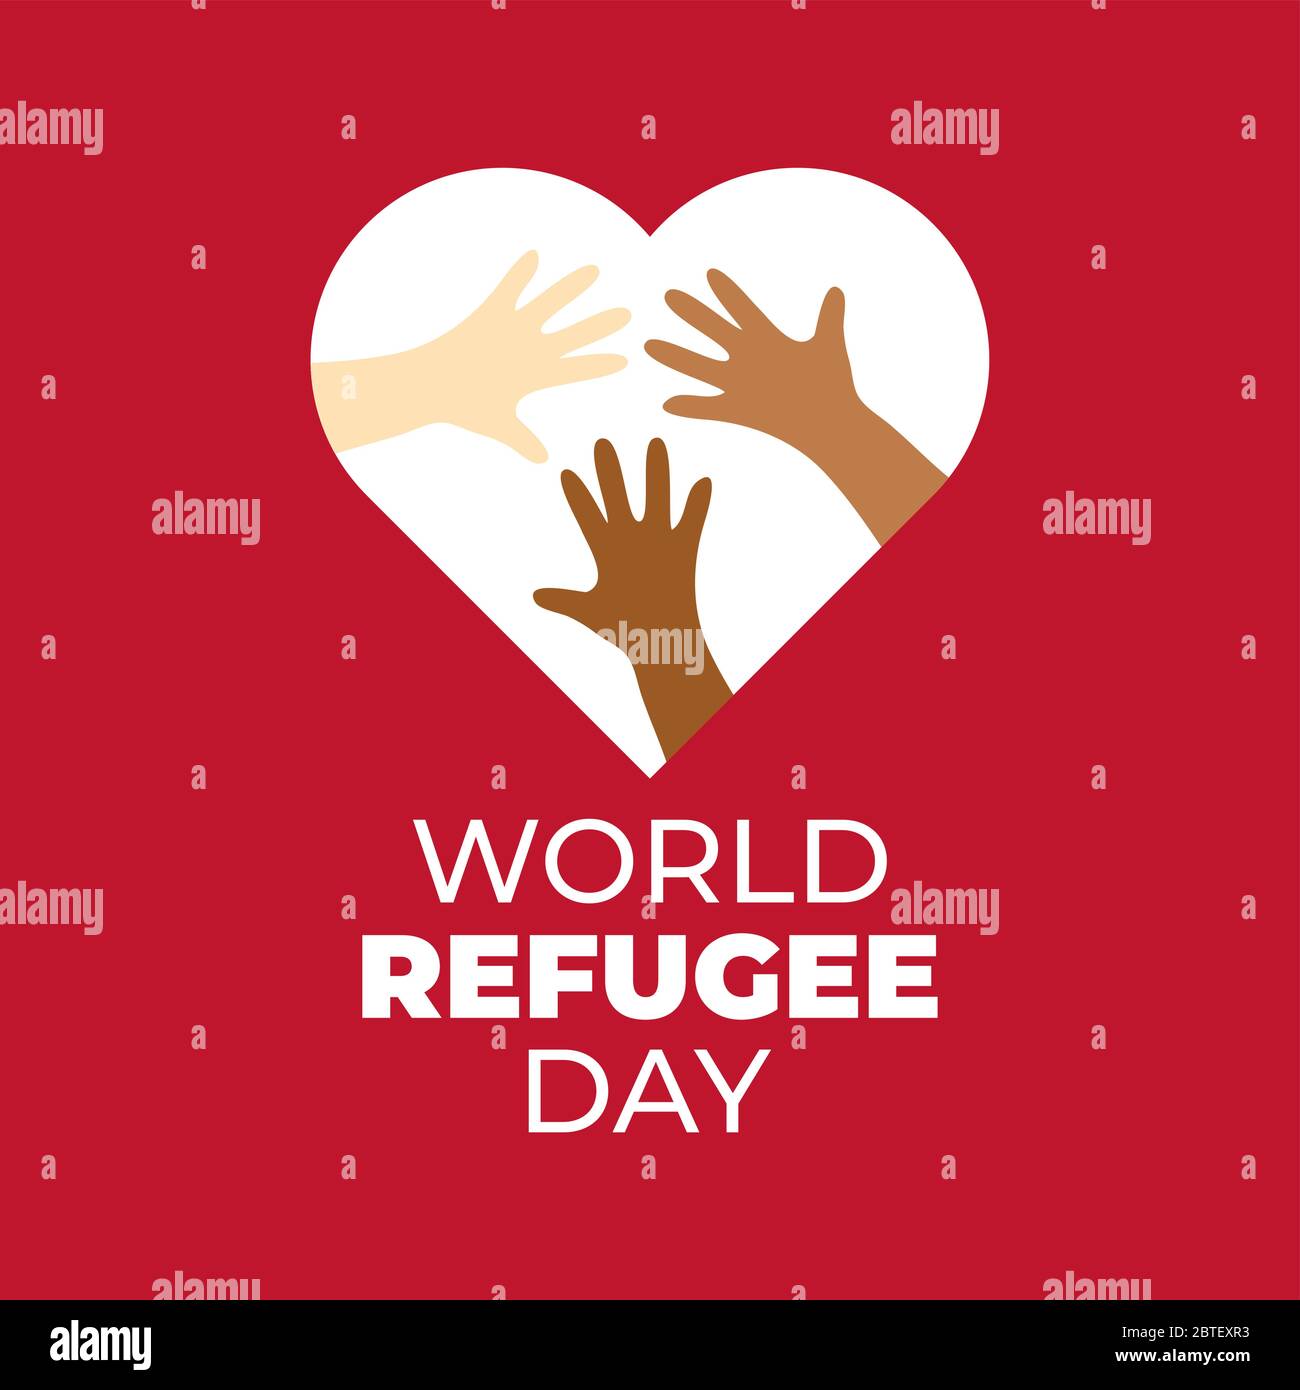 World refugee day campaign poster. Refugee awareness poster template. heart with hands on red background Stock Vector